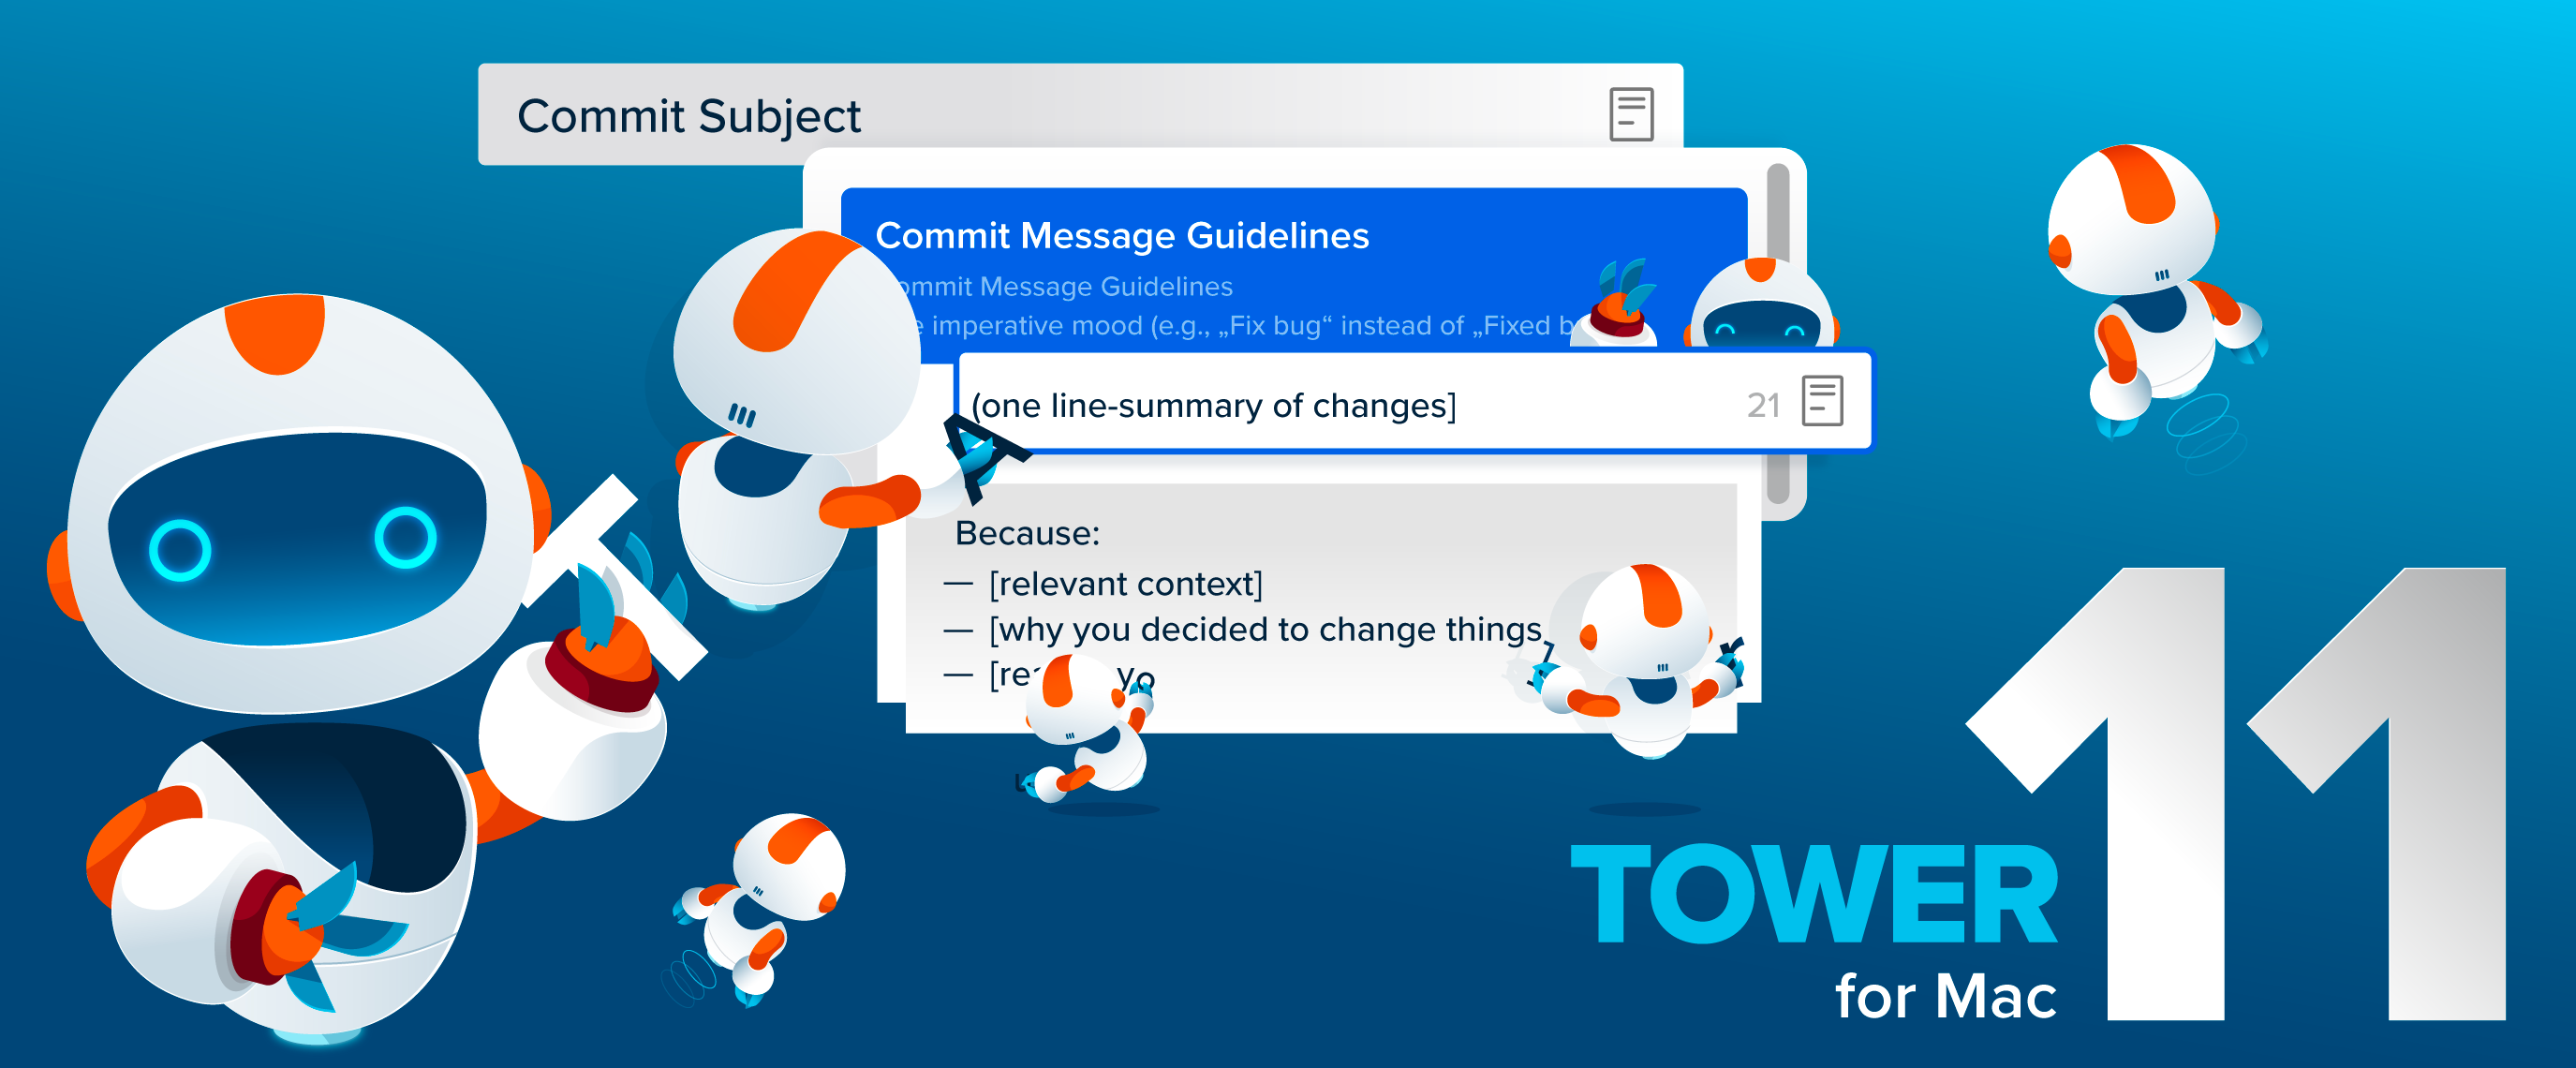 Tower 11 for Mac — Say Goodbye to Commit Chaos!